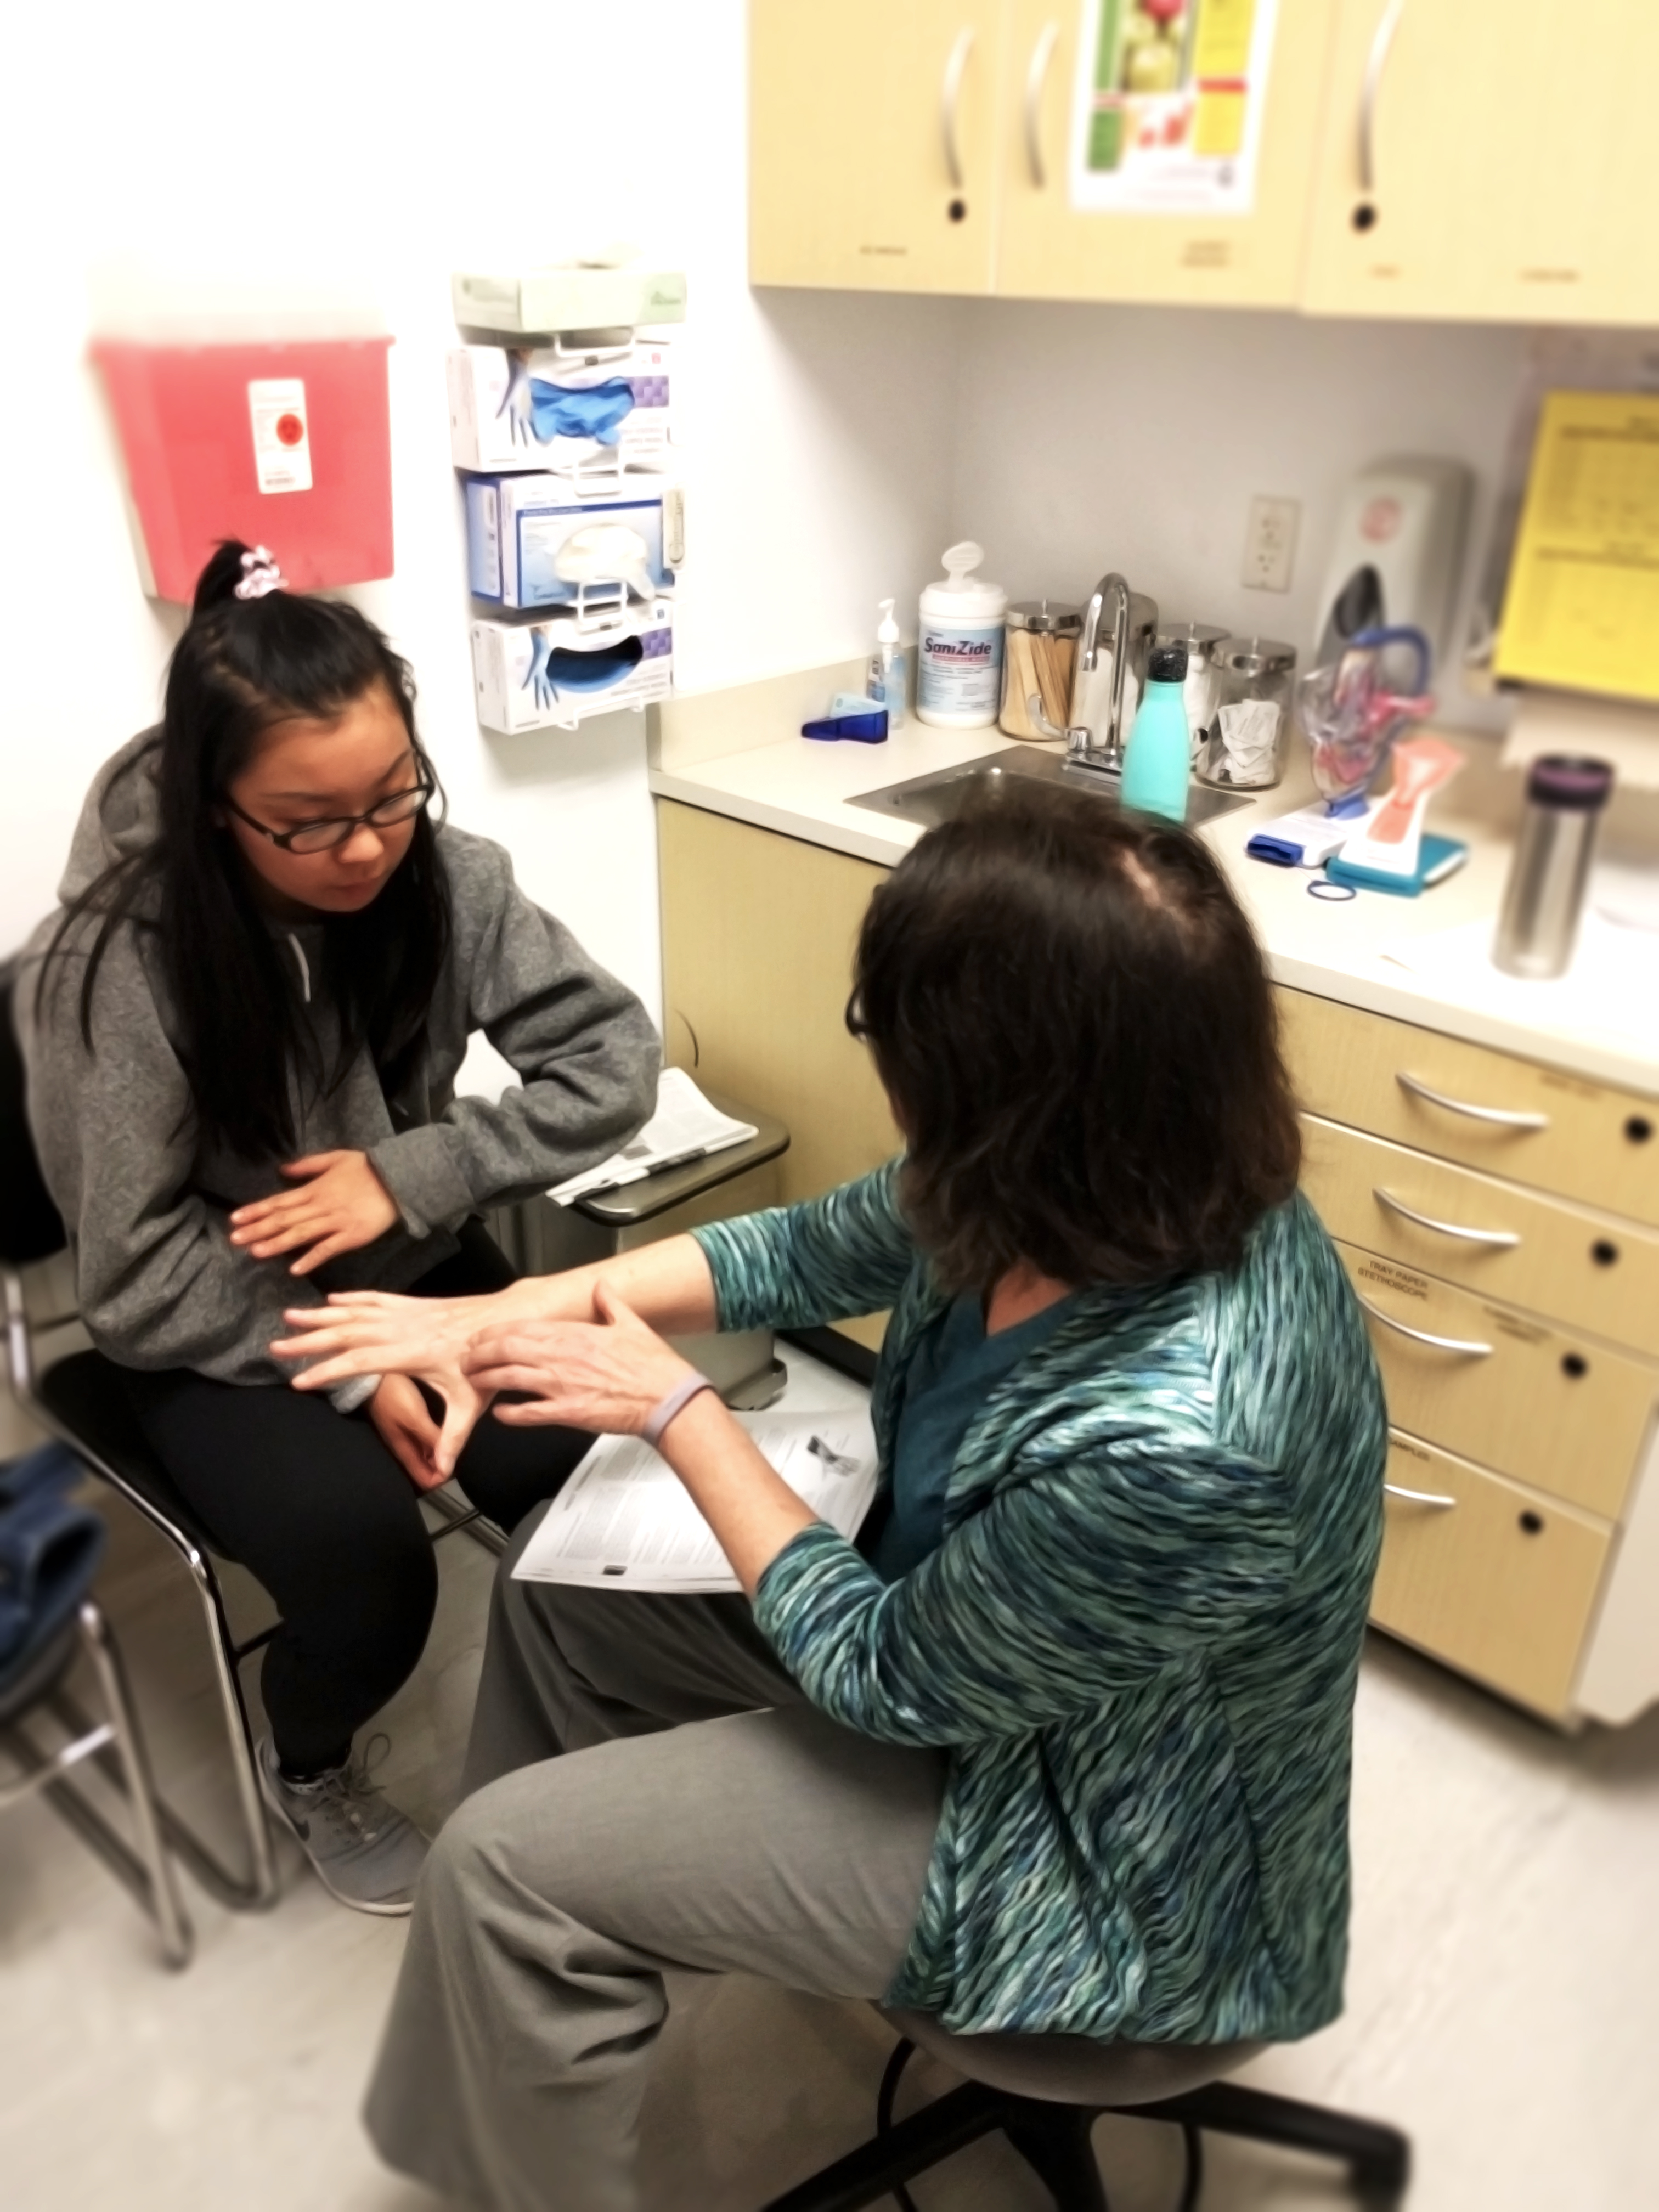 Nurse practitioner Mary Redfern is showing City College Student Brenda Chu how to deal with pain she’s feeling in her arm.  